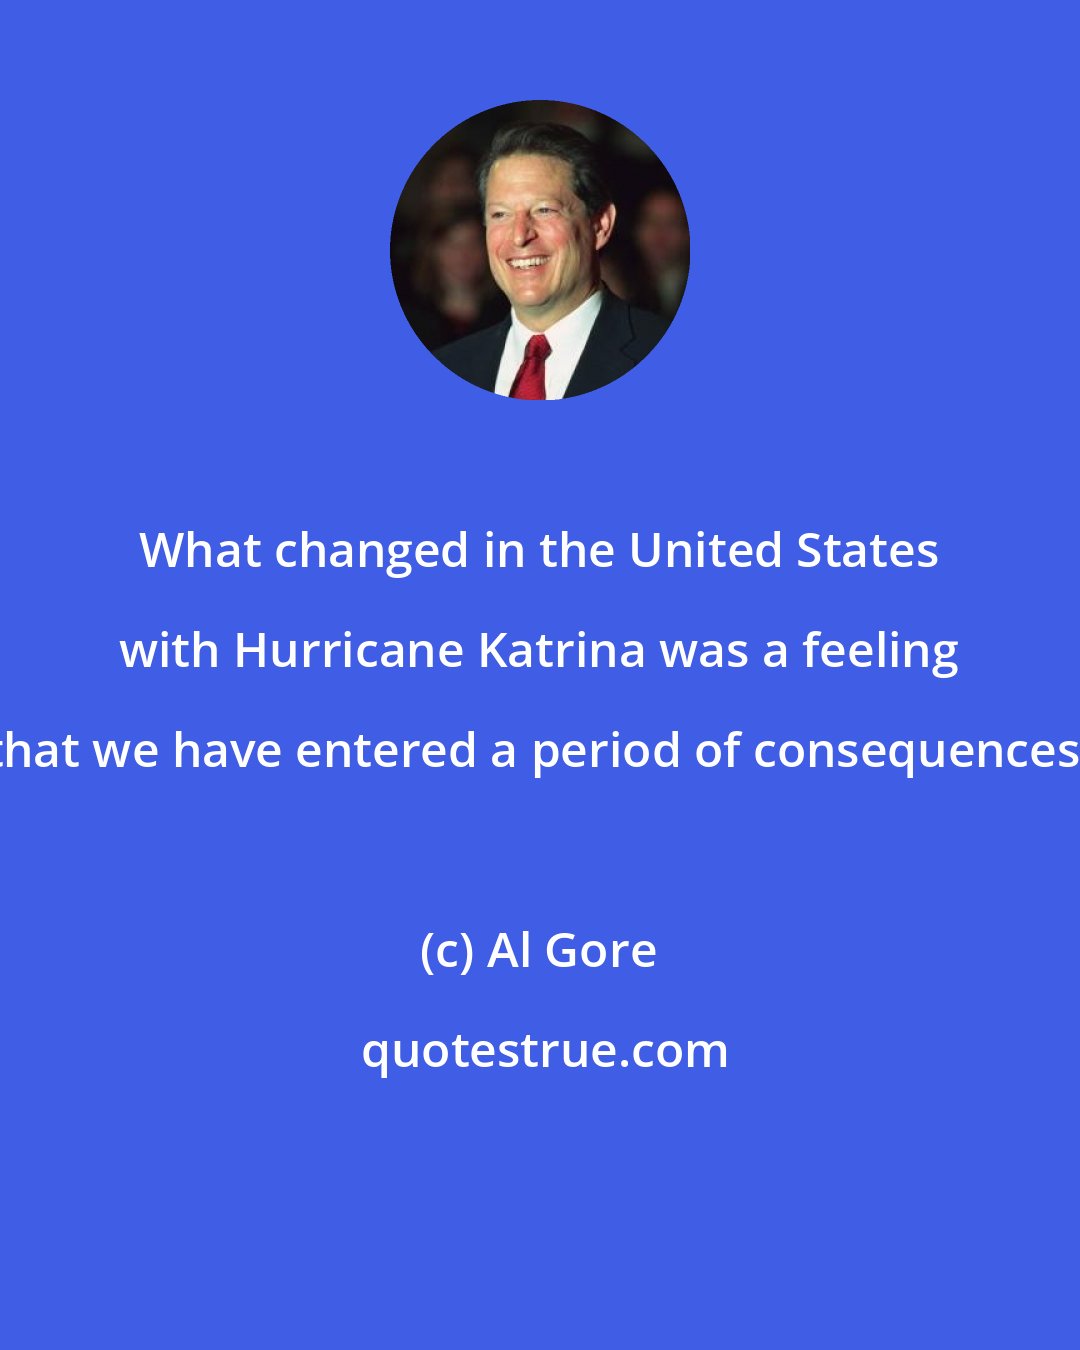 Al Gore: What changed in the United States with Hurricane Katrina was a feeling that we have entered a period of consequences.